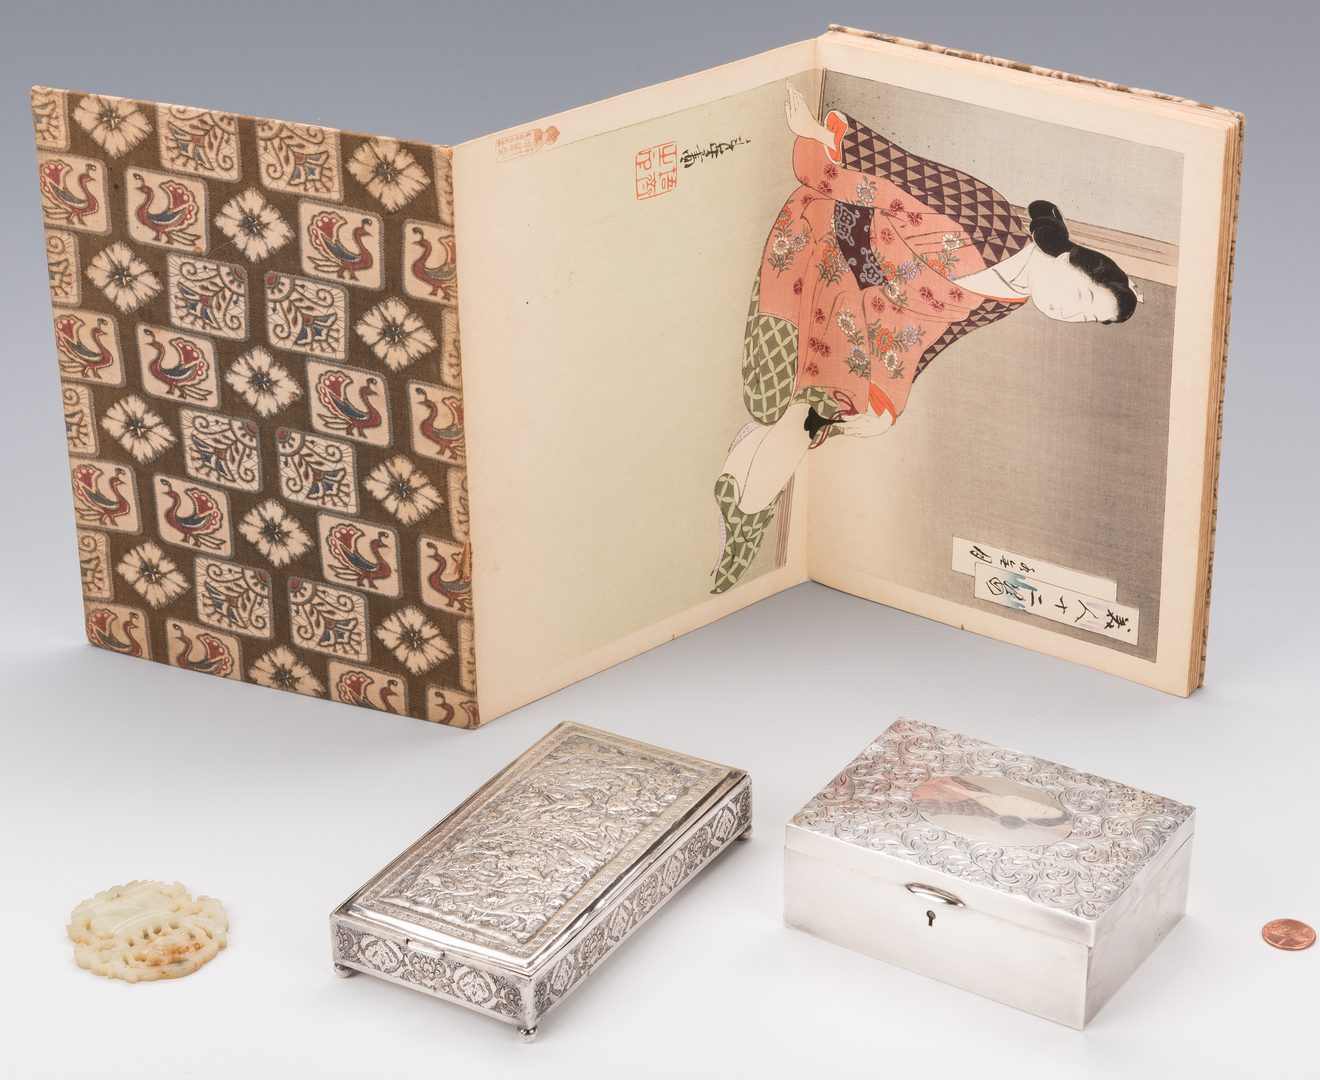 Lot 754: 4 Decorative Items, inc. 2 silver boxes, Japanese accordion book